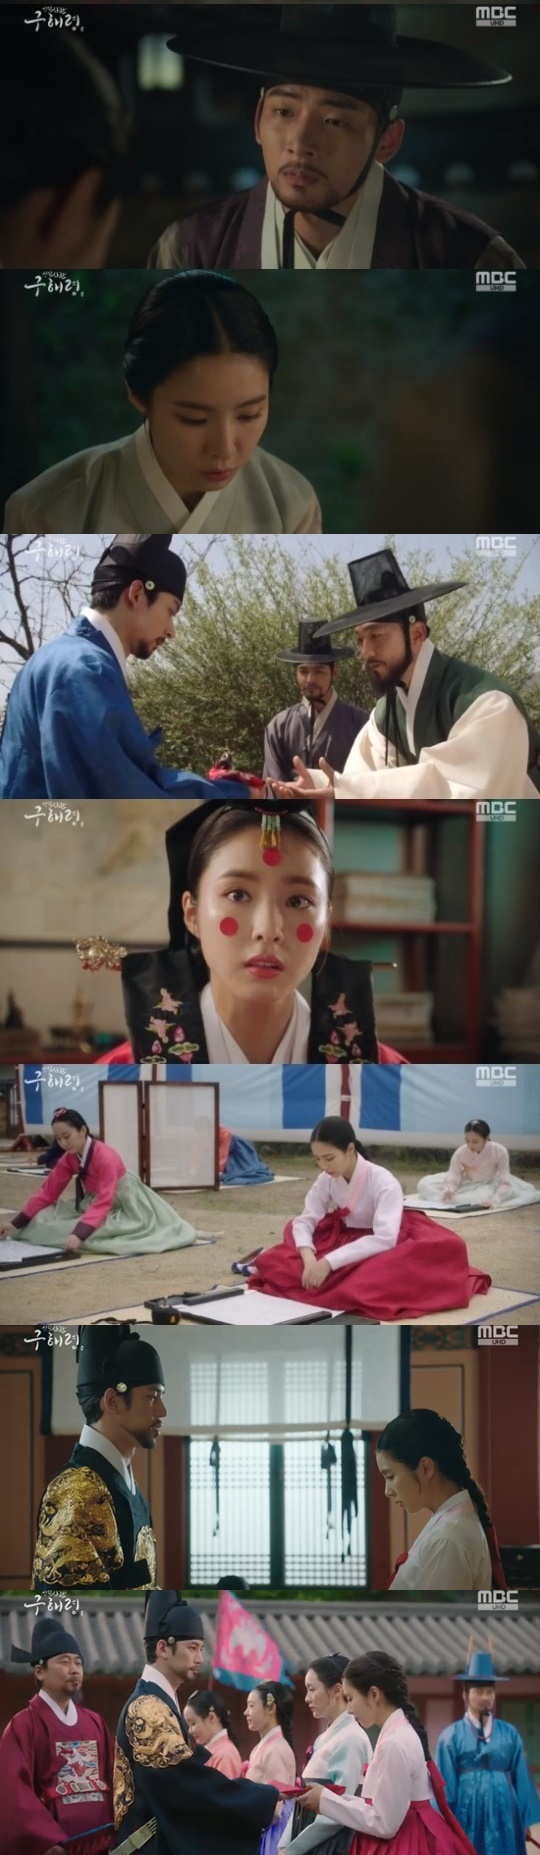 The new cadets, Na Hae-ryung, Shin Se-kyung and Cha Jung Eun-woo, were reunited at the palace.In the MBC drama Na Hae-ryung, which was broadcast on the afternoon of the 24th, the images of Na Hae-ryung (Shin Se-kyung) and Lee Lim (Jung Eun-woo) were drawn.When he learned that a separate event was to be held to select female officers, he visited the Seung-Hoon Lee (Seo Young-joo) the night before Wedding Bible.Na Hae-ryung, who said, I came to you knowing it was a great excuse. Im sorry to surprise you. He knelt down and said, Please leave the marriage.I can not make a innocent Sunbee a man who has been dismissed. Seung-Hoon Lee said: Have you done anything wrong with the lunatic in our family?I was wrong, I tried to accept it. I tried to think it was fate, said Na Hae-ryung.But my heart is not like my heart. I am not confident that I will live my whole life as an innocent GLOW in the rites. Seung-Hoon Lee said: If I turn down the nanza on my side, the nanza will be pointed out for life as the broken GLOW; you wont be able to save the nanza.So you did not like this marriage until then. The next day, Seung-Hoon Lee shouted, I can not marry this marriage as soon as Wedding Bible began, as asked by Na Hae-ryung.Na Hae-ryung smiled at the sound and ran straight to the test site.In the star poem, Lee Jin (Park Ki-woong) asked if there was a way to prevent the eclipse with a tense, and Na Hae-ryung said, If the moon covers the sun, it becomes a eclipse and if the earth covers the moon, it becomes a lunar eclipse.This is not a scolding of the sky, but a natural law that takes place in the course of the celestial operation, so there is no way to stop Jegal even if he comes back alive. After the holiday, Min Woo-won (Lee Ji-hoon) handed Lee Jin (Park Ki-woong) the city of Na Hae-ryung.Lee Jin called out Na Hae-ryung and asked, Do you think my tense is wrong? Do you think I am wrong?Gu Na Hae-ryung said: If you think there is a way to stop the eclipse, it is wrong; the truth is as it is; people cannot stop the sky.The reason why the old ceremony seems to end the eclipse is because the old ceremony was held until the end of the eclipse, not the old ceremony. Lee Jin said, How many people can go to the council because they have been sick in this Europe ship? I do not know.You were born and never lived so much for a day. One book could teach you a full-length name. Joseon is a poor Europe.Five in the heat worry about eating tomorrow, sleep, and six in the heat can not be treated even if it hurts. Lee Jin said, Even if the child dies, he can not even give a proper grave, and he knows how free and luxurious the reason of heaven is.Do you know that even learning and realizing something is a benefit that only people like you and me can enjoy? Doing old-fashioned rituals in coordination is only to reassure the people. It will not be a big deal.Dont worry. I just wanted to say that. I think my poetry is wrong. Is there any disagreement?On the other hand, Lee Lim ended his life in prison with the consideration of Lee Jin (Park Ki-woong), and went out of the palace for a long time.He visited Heavens Bookstore to find Na Hae-ryung, who was smearing the owner of Heavens Bookstore, who sold the plum teacher, and pretending to be a fake plum.When Hussambo (the Holy Land) confronted the owner of Heavens Bookstore, he said, The ungrateful man. How dare you sell the plum teacher? Its just caught.In the meantime, Irim was punched in the face and shed nose blood and fainted.Irim asked the owner of Heavens Bookstore, My nose hit me with a fall on the road, and where can I find that GLOW? A fake plum.Lady Na Hae-ryung? Irim laughed brightly.Later, Na Hae-ryung passed the extraordinary and became a female officer; however, the officials ignored the first ladies; and Koo Na Hae-ryung said, I will work hard.Please teach me to be a good officer. Min Woo-won told Na Hae-ryung, You are not a officer. The first ladies took charge of the remorse, and they thought that the reason they were ignored while talking was because they did not do the ceremony, which was a ceremony for the new officers.I have seen the past, but I have seen it, the women said. If you are right, if you dance, you will dance and take off if you take off.At the scene of the ceremony, Hanlim recommended Kwon Ji to drink. After drinking instead, Koo Hae-ryung, who was in trouble and drinking, said, I am as harassed as I love you.Please accept the glass, he said, recommending a drink to Yang Si-haeng (Heo Jeong-jung), who unintentionally had a drinking showdown, and Yang Si-haeng fell drunk.The next morning, Na Hae-ryung was unable to enter the palace after sleeping.Na Hae-ryung, who entered the den through the doghole with the doormans tip, accidentally encountered Irim in the palace.The new employee, Na Hae-ryung, is broadcast every Wednesday and Thursday at 9 p.m.Photo  MBC Broadcasting Screen